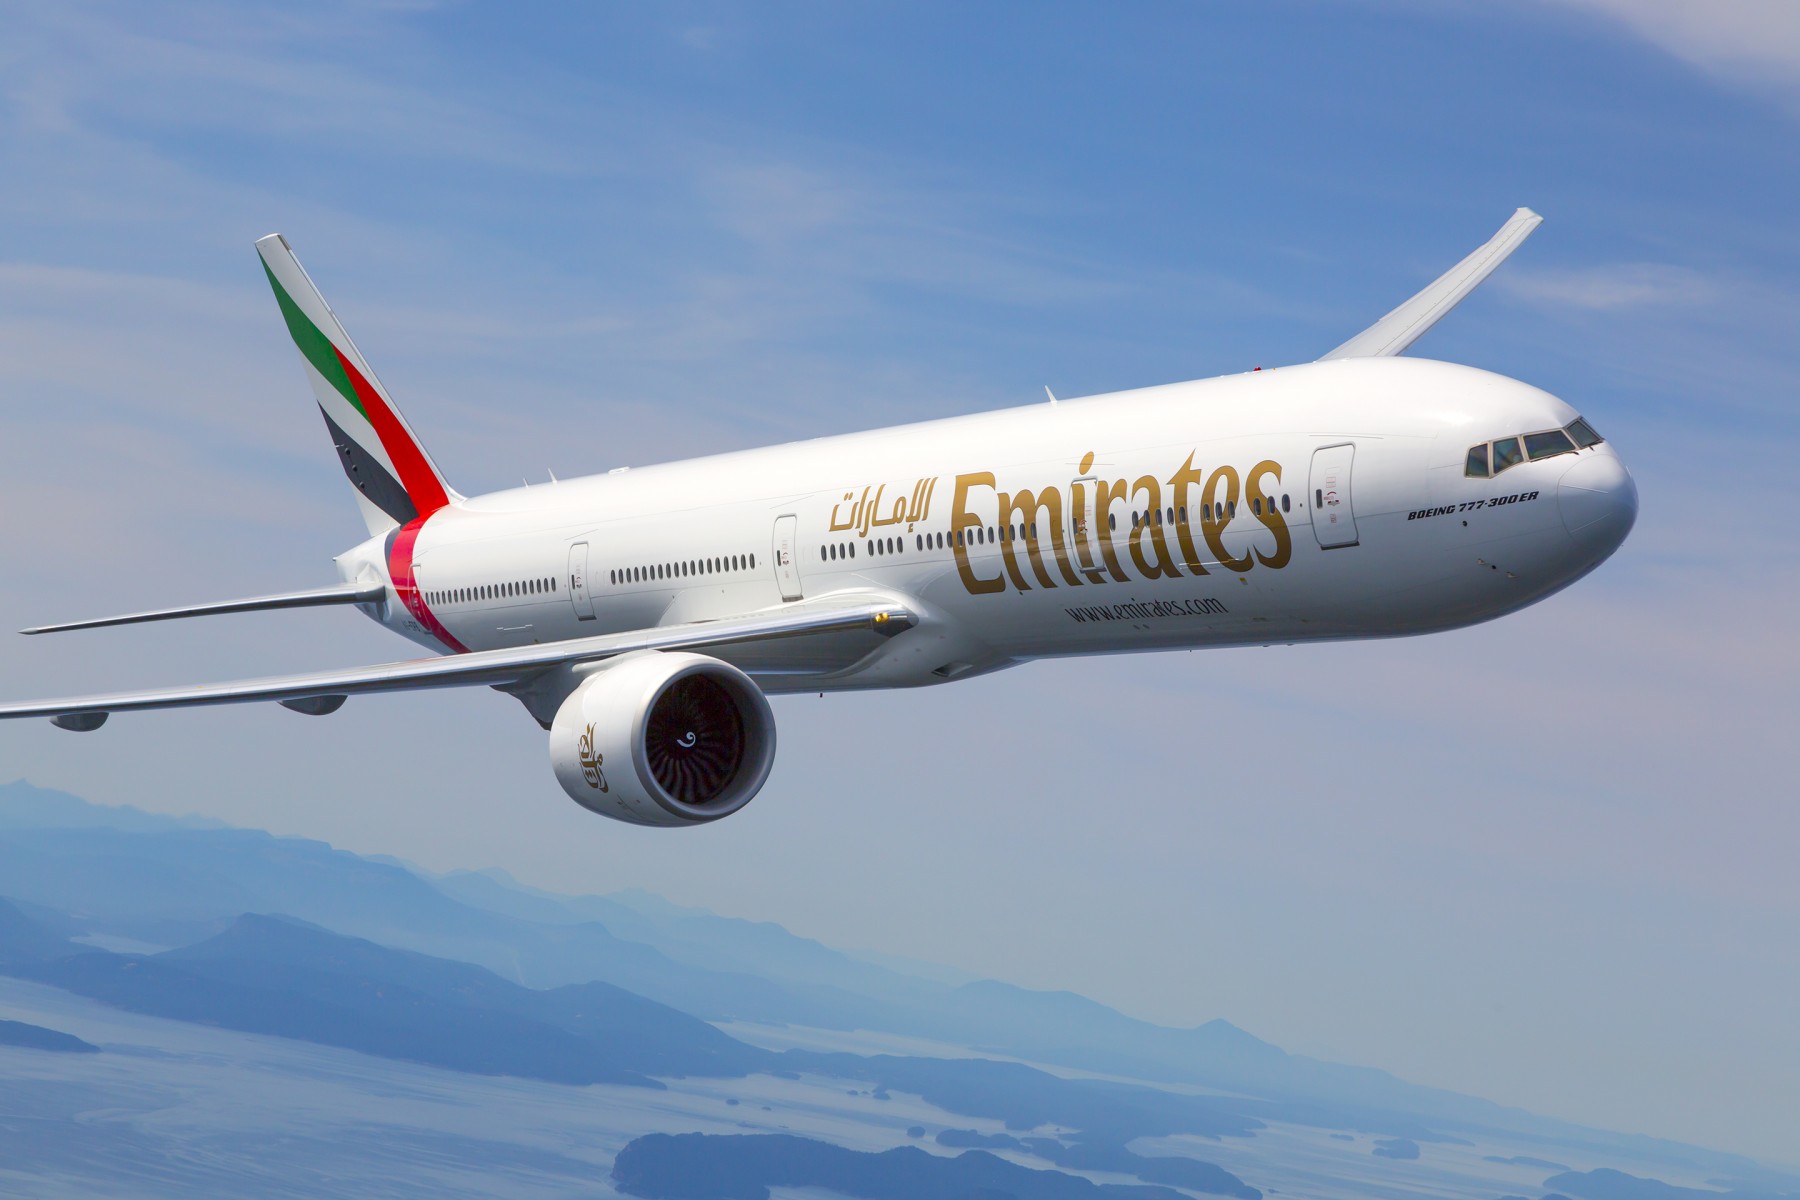 Emirates A380 makes first London Stansted trip to pick up Arsenal